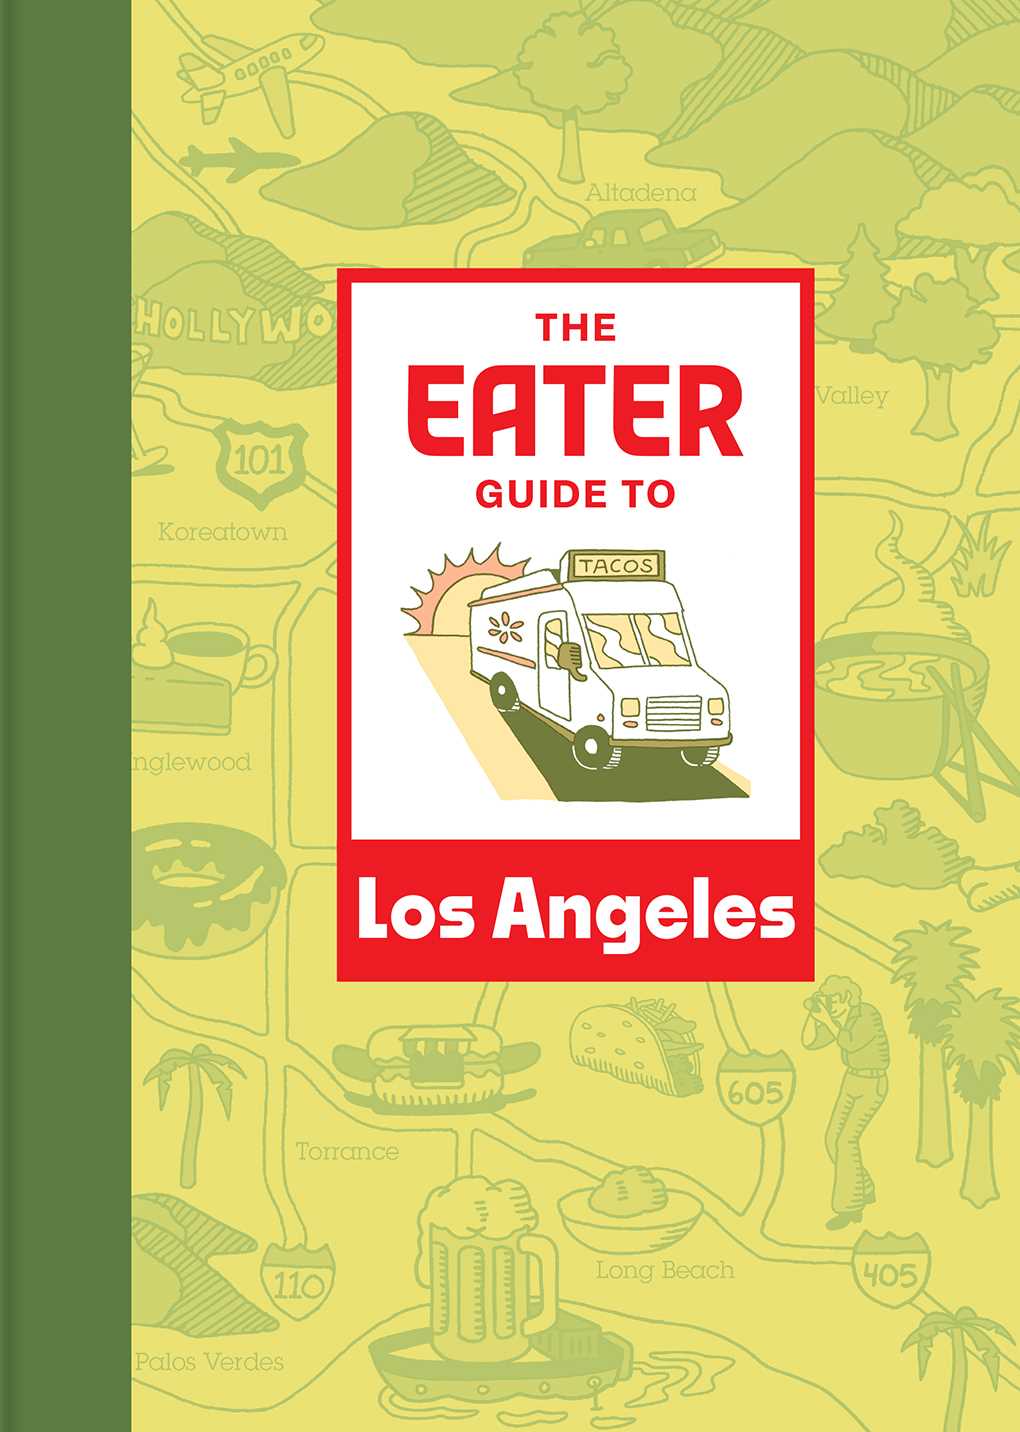 Los Angeles (Eater City Guide)